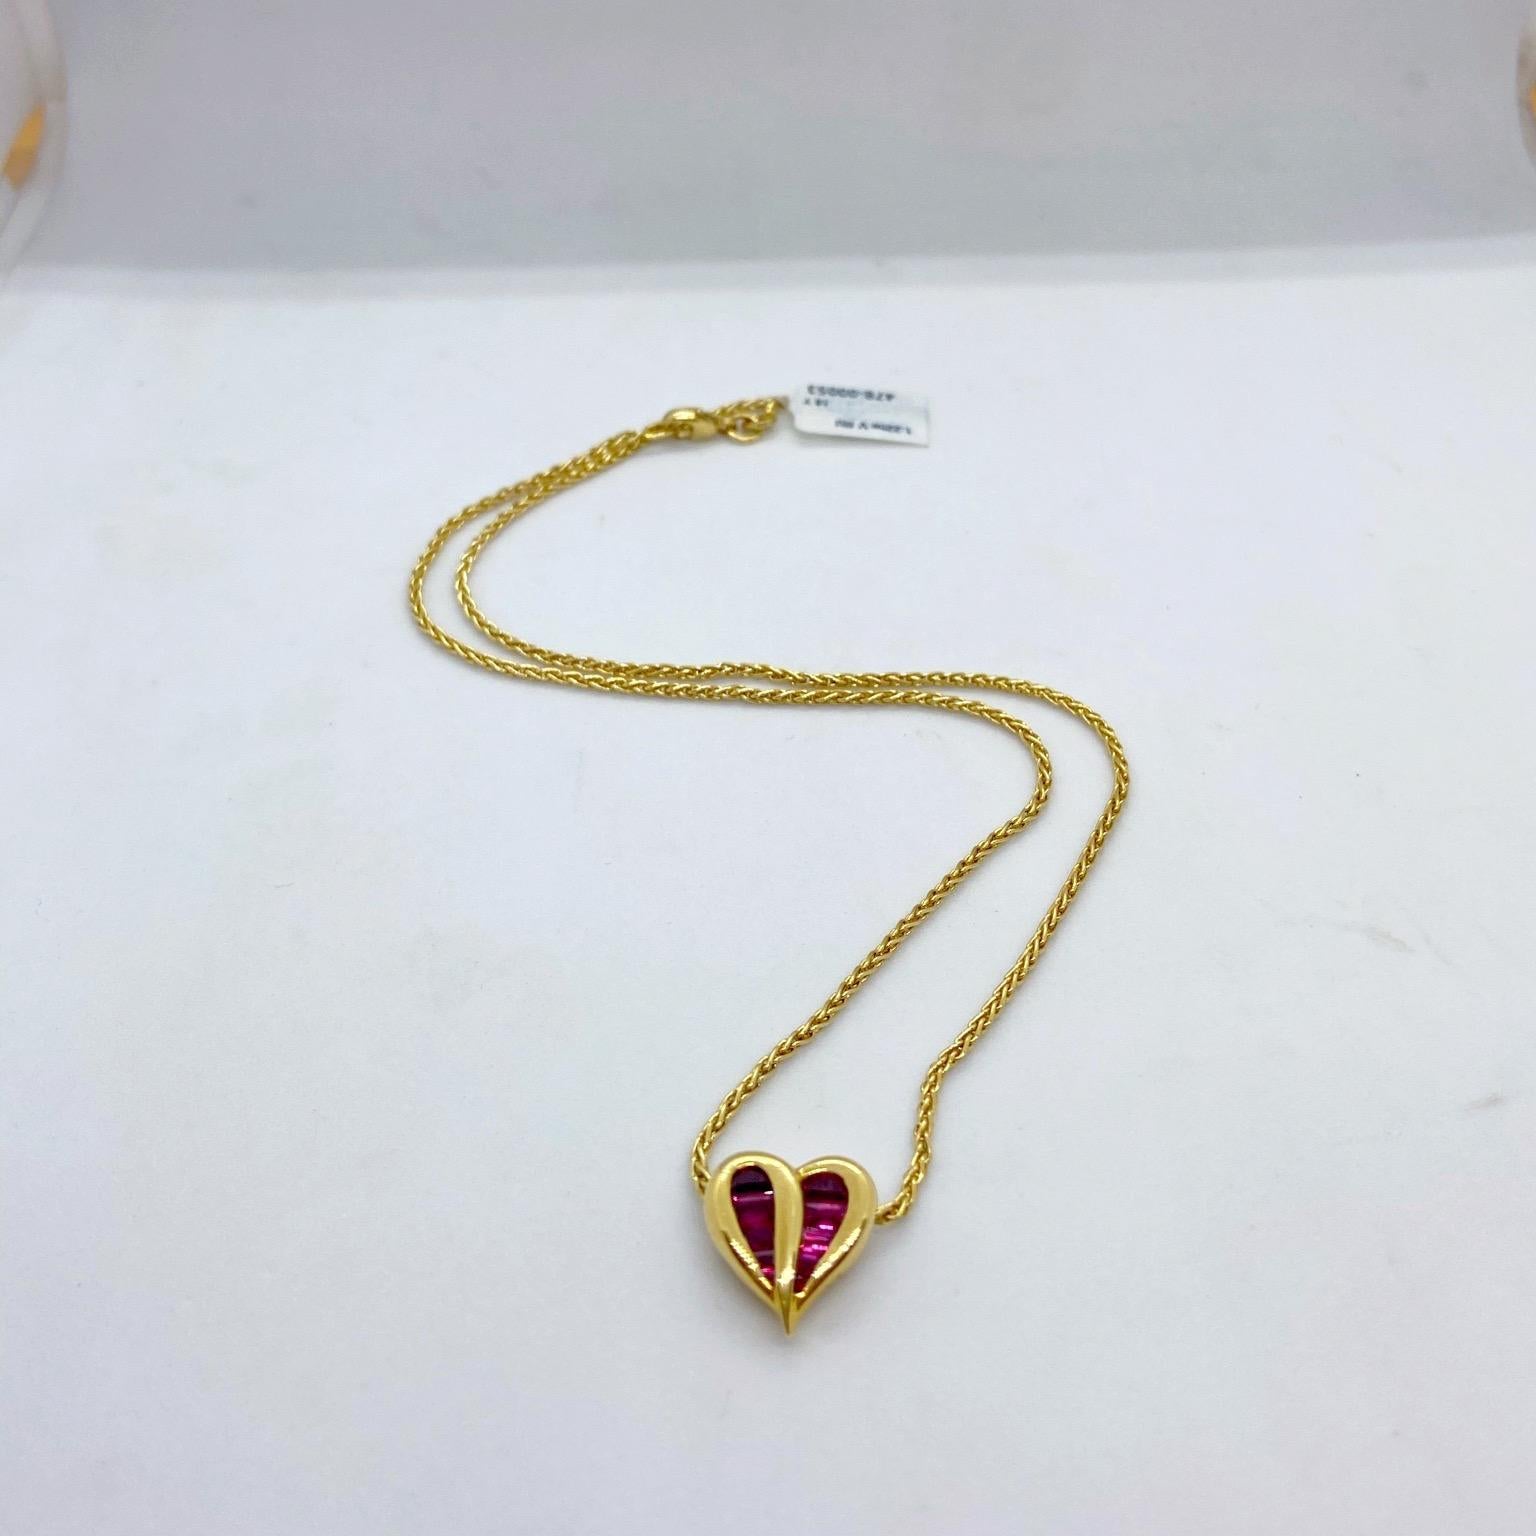 Charles Krypell Jewelry is a New York Based fine jewelry brand that became internationally known for its exquisite use of color, novel designs, and outstanding craftsmanship. 
This 18 karat yellow gold heart is set with invisibly set tapered ruby